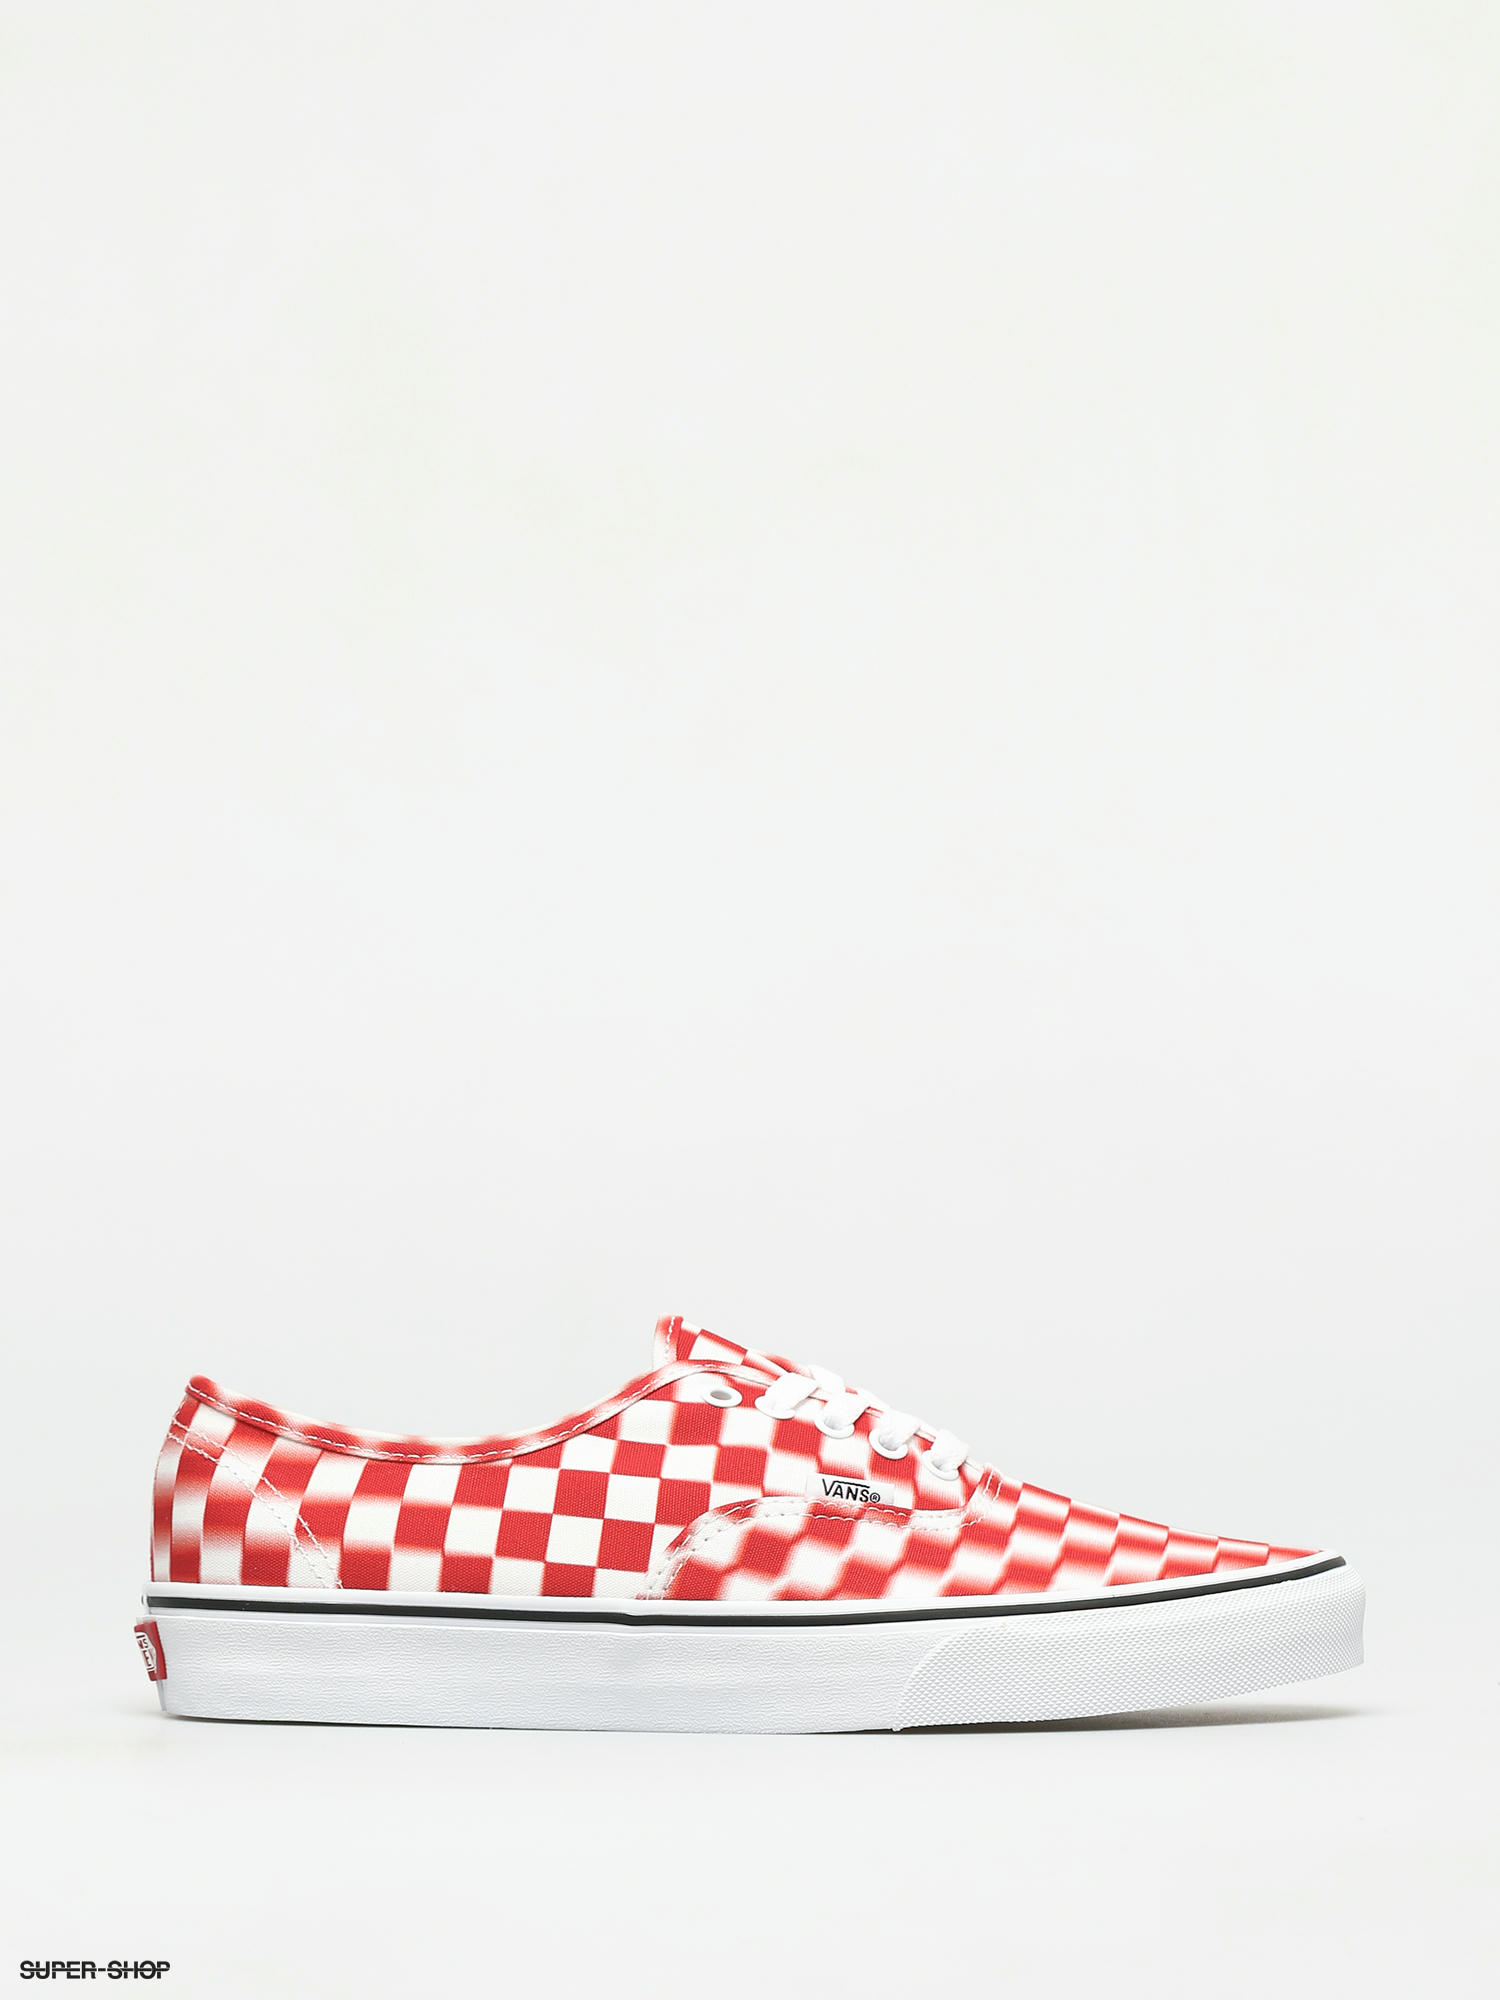 vans white and red checkered